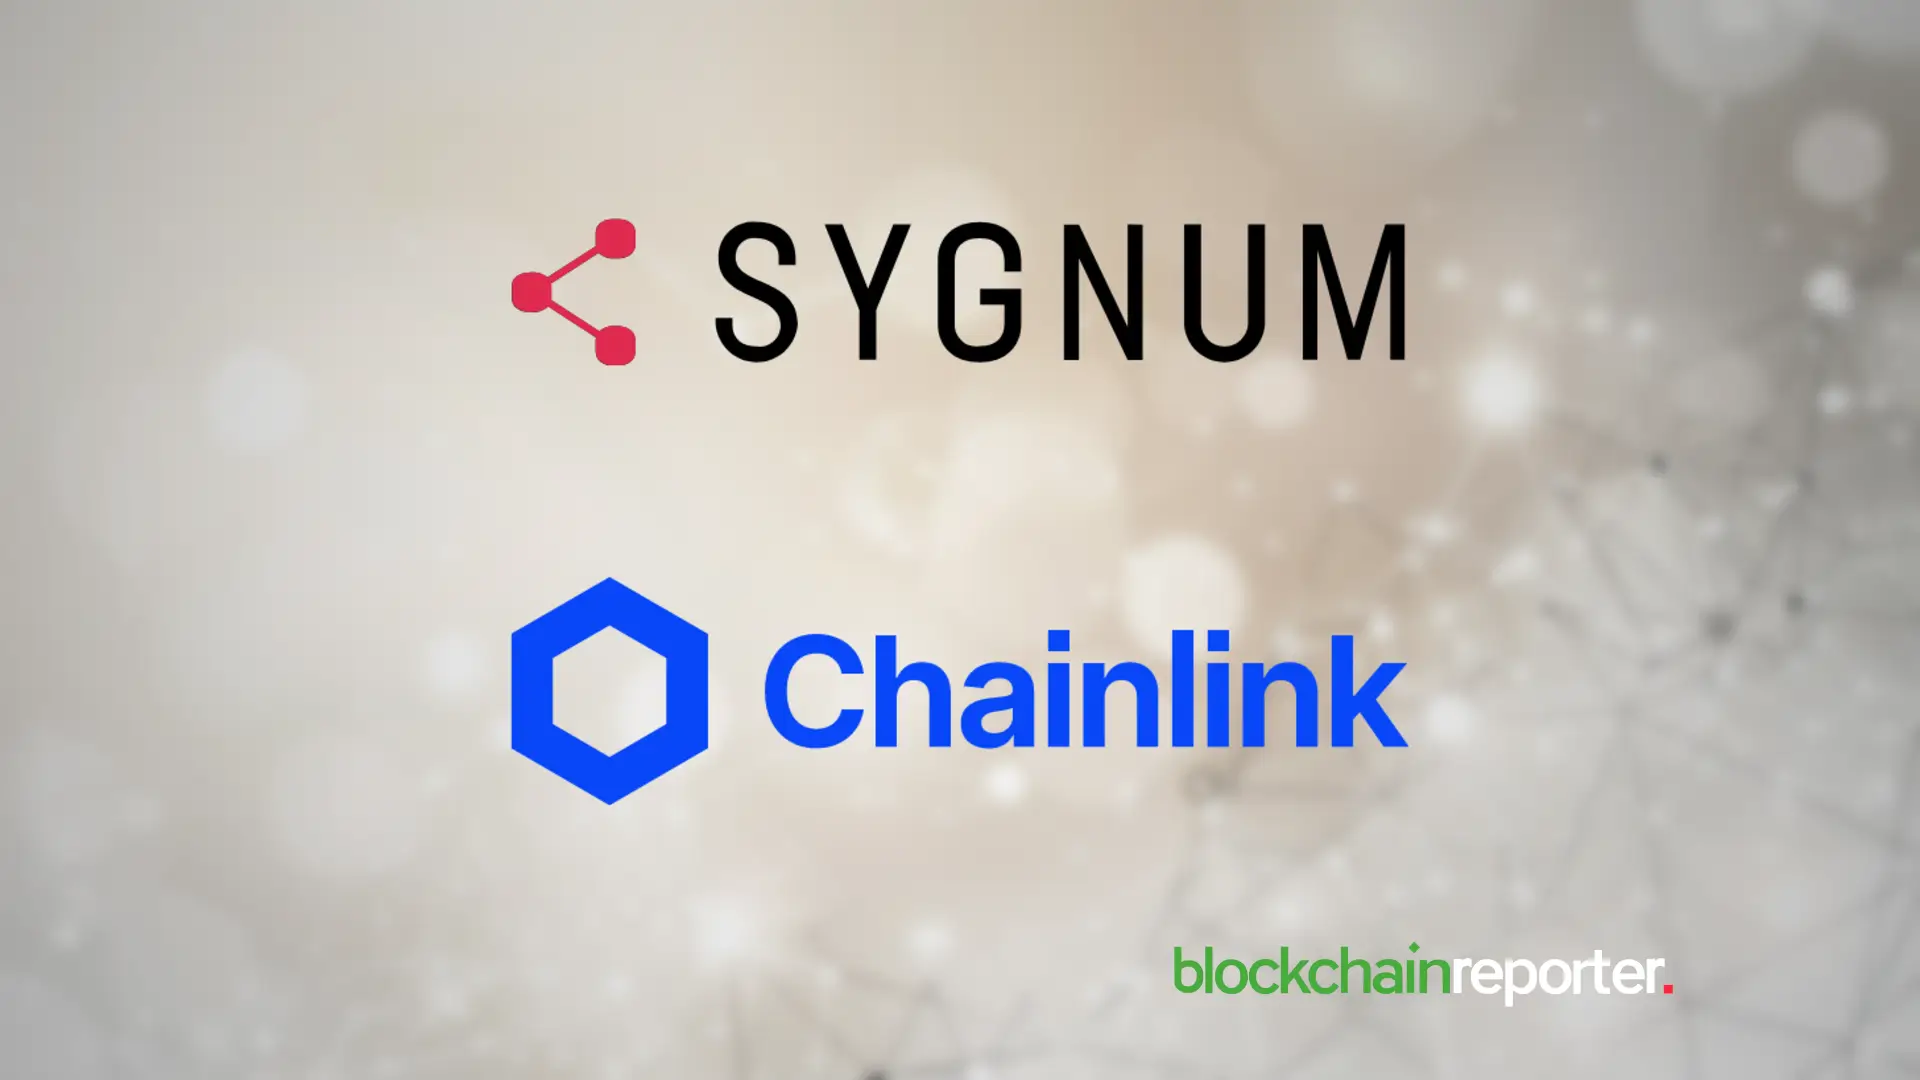 From Wall Street to Blockchain: Sygnum and Fidelity’s Pioneering Move to Tokenize $6.9 Billion Fund